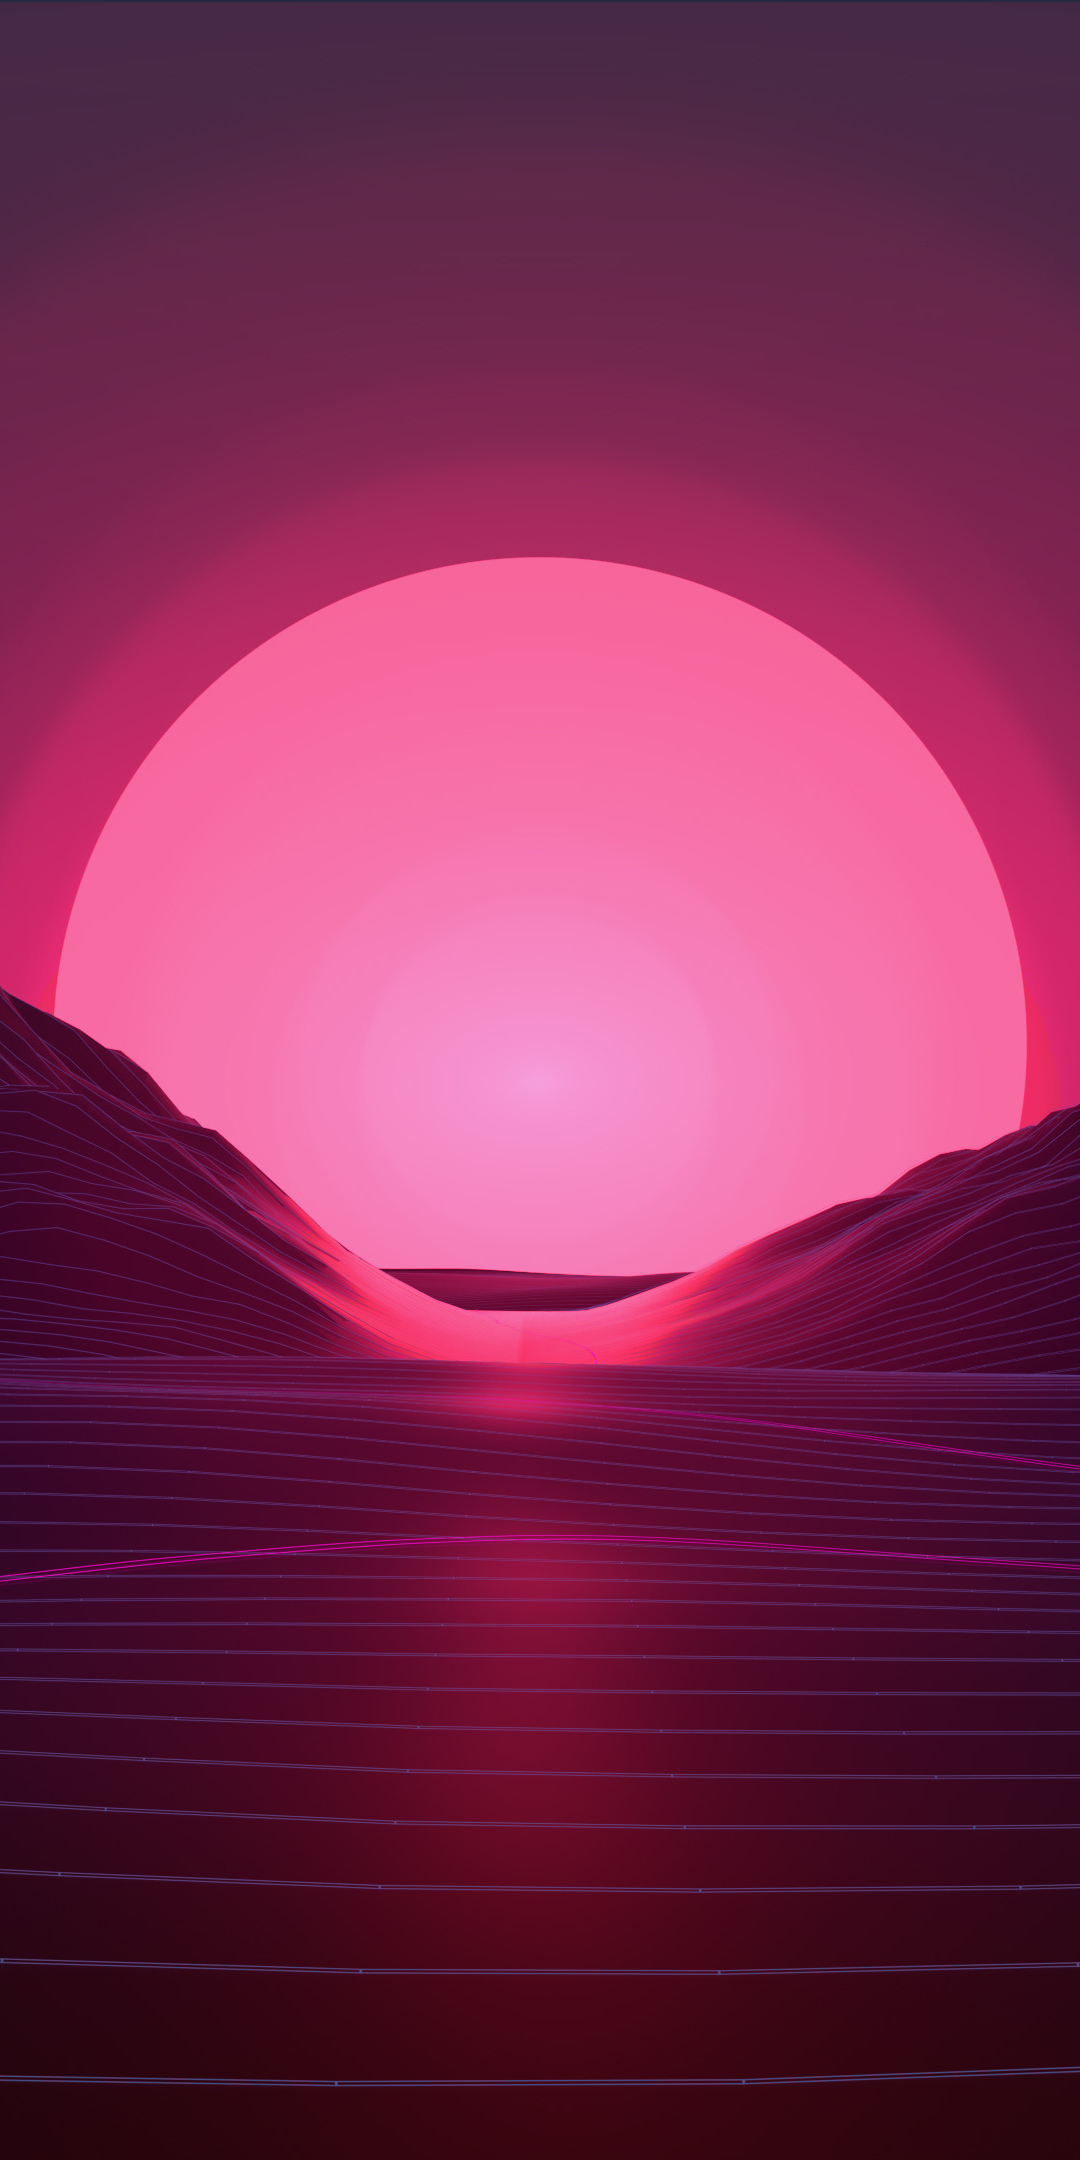 Sunset, mountains, neon pink, abstract, 1080x2160 wallpaper